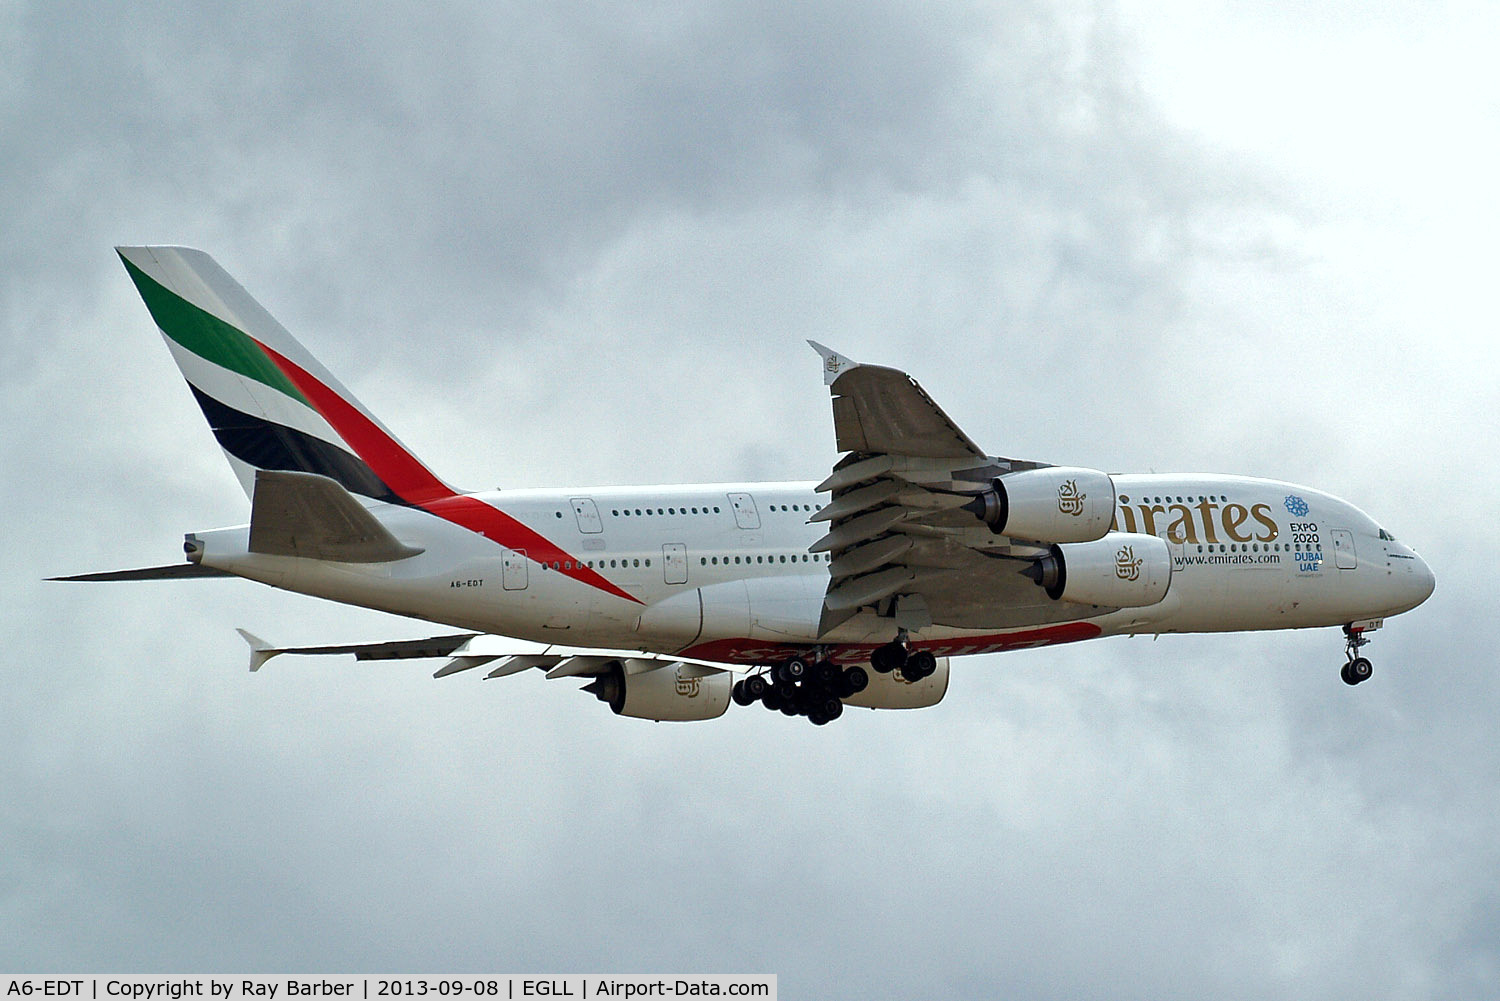 A6-EDT, 2011 Airbus A380-861 C/N 090, Airbus A380-861 [090] (Emirates Airlines) Home~G 08/09/2013. On approach 27L.